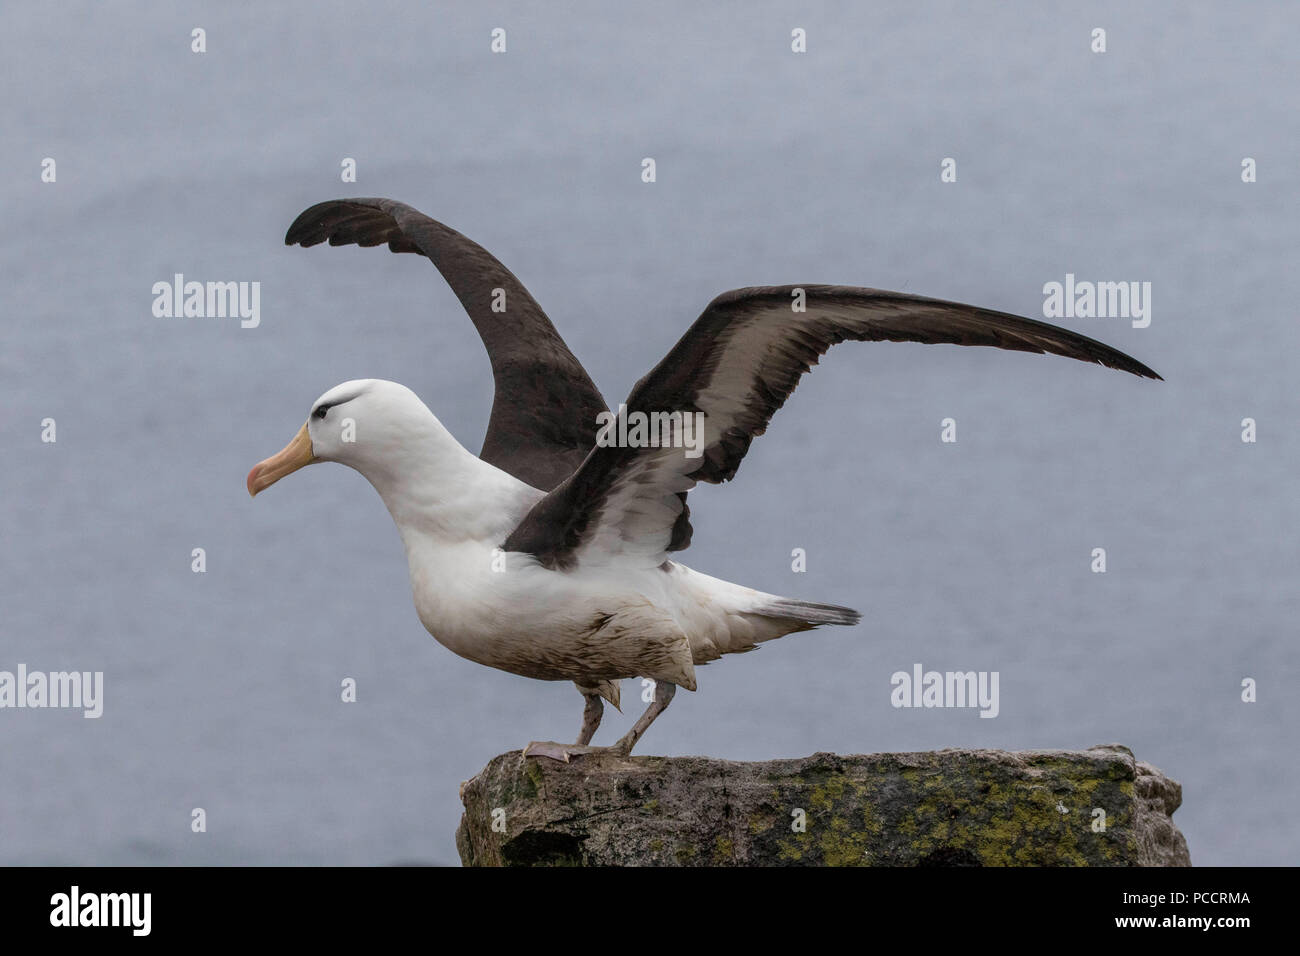 Black broiwed albatross with wings spread at a rookery in the Falkland islands Stock Photo